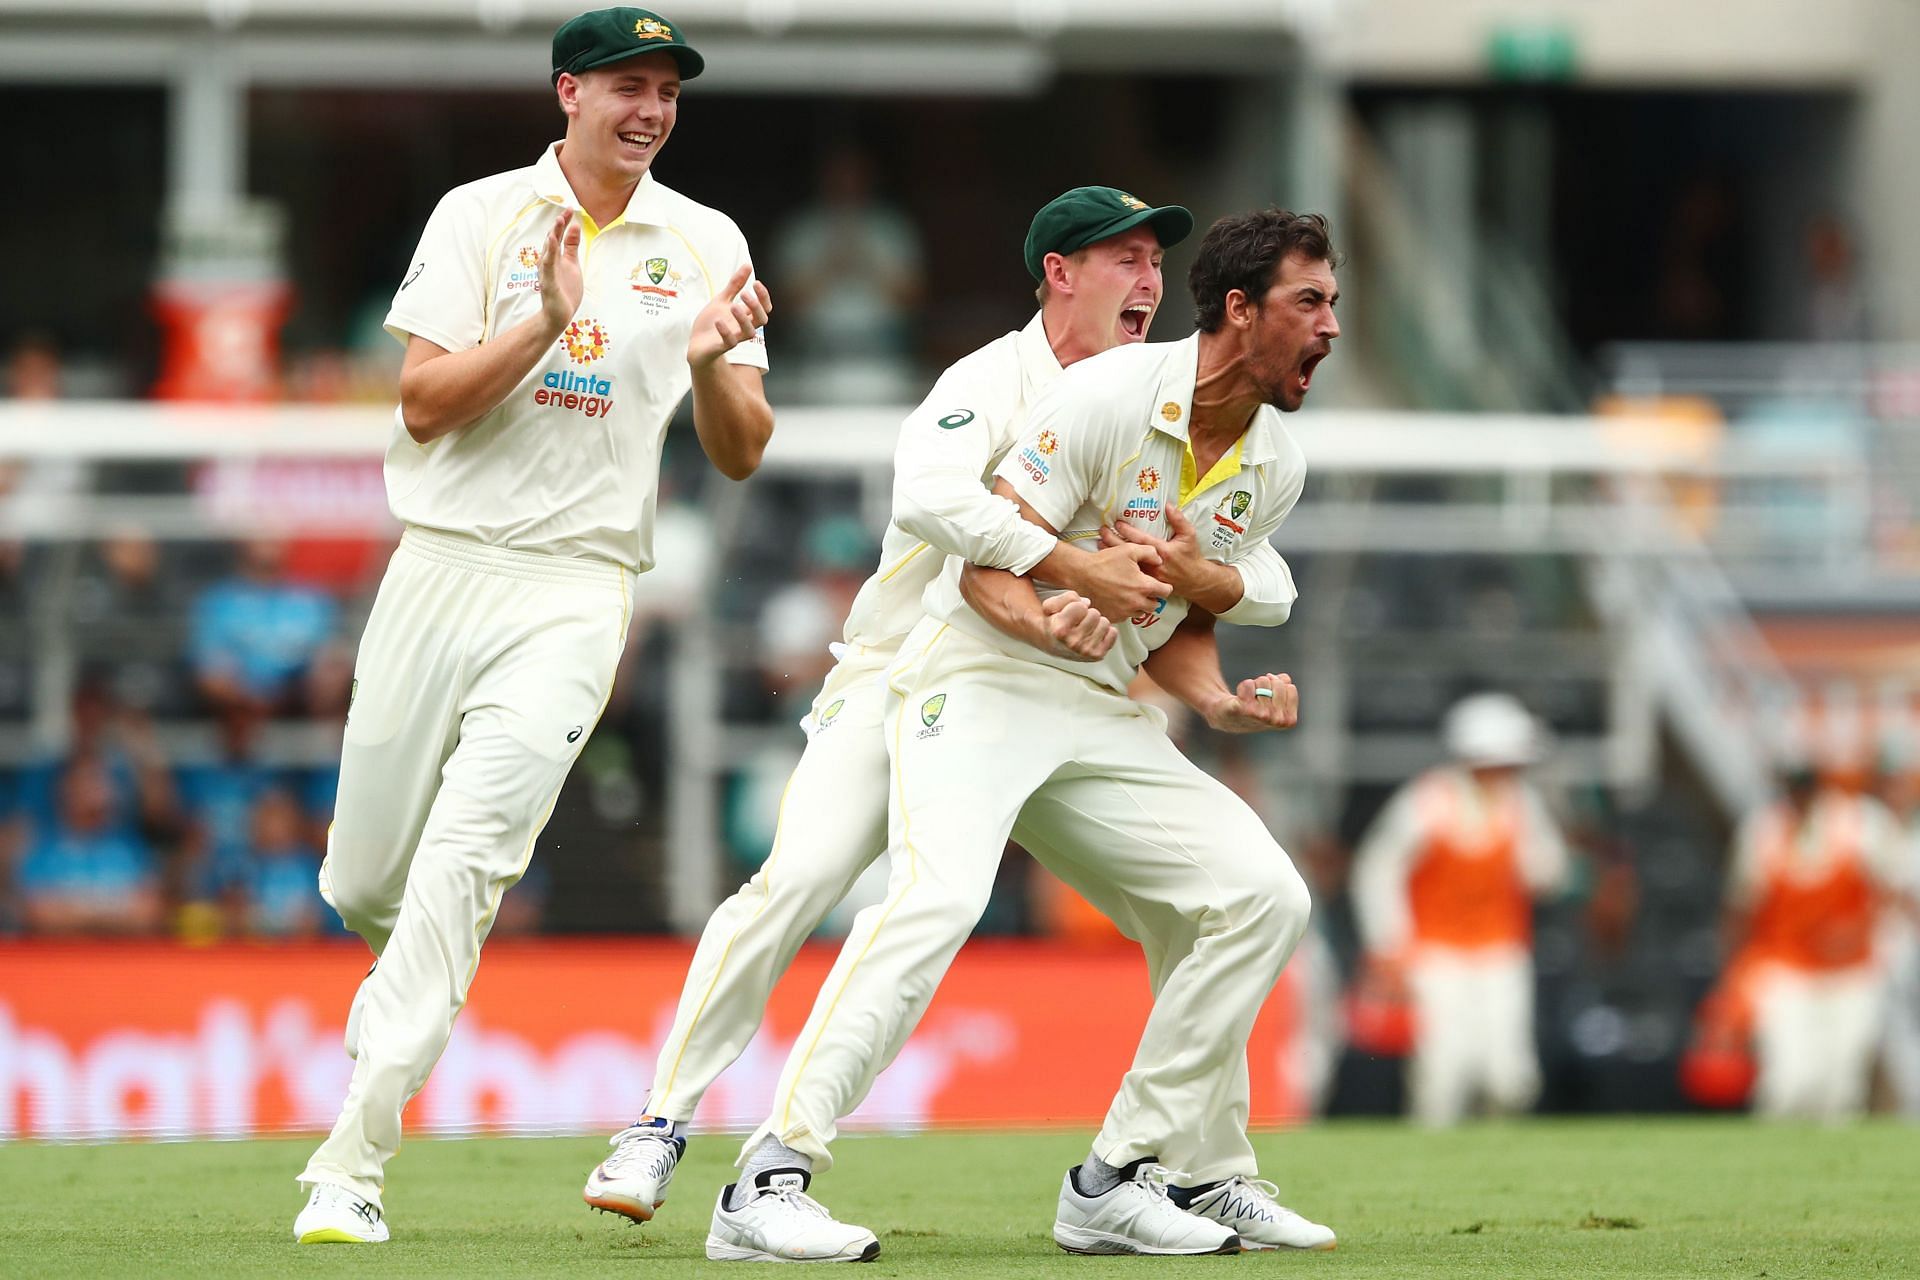 Mitchell Starc is ecstatic after dismissing Rory Burns. Pic: Getty Images